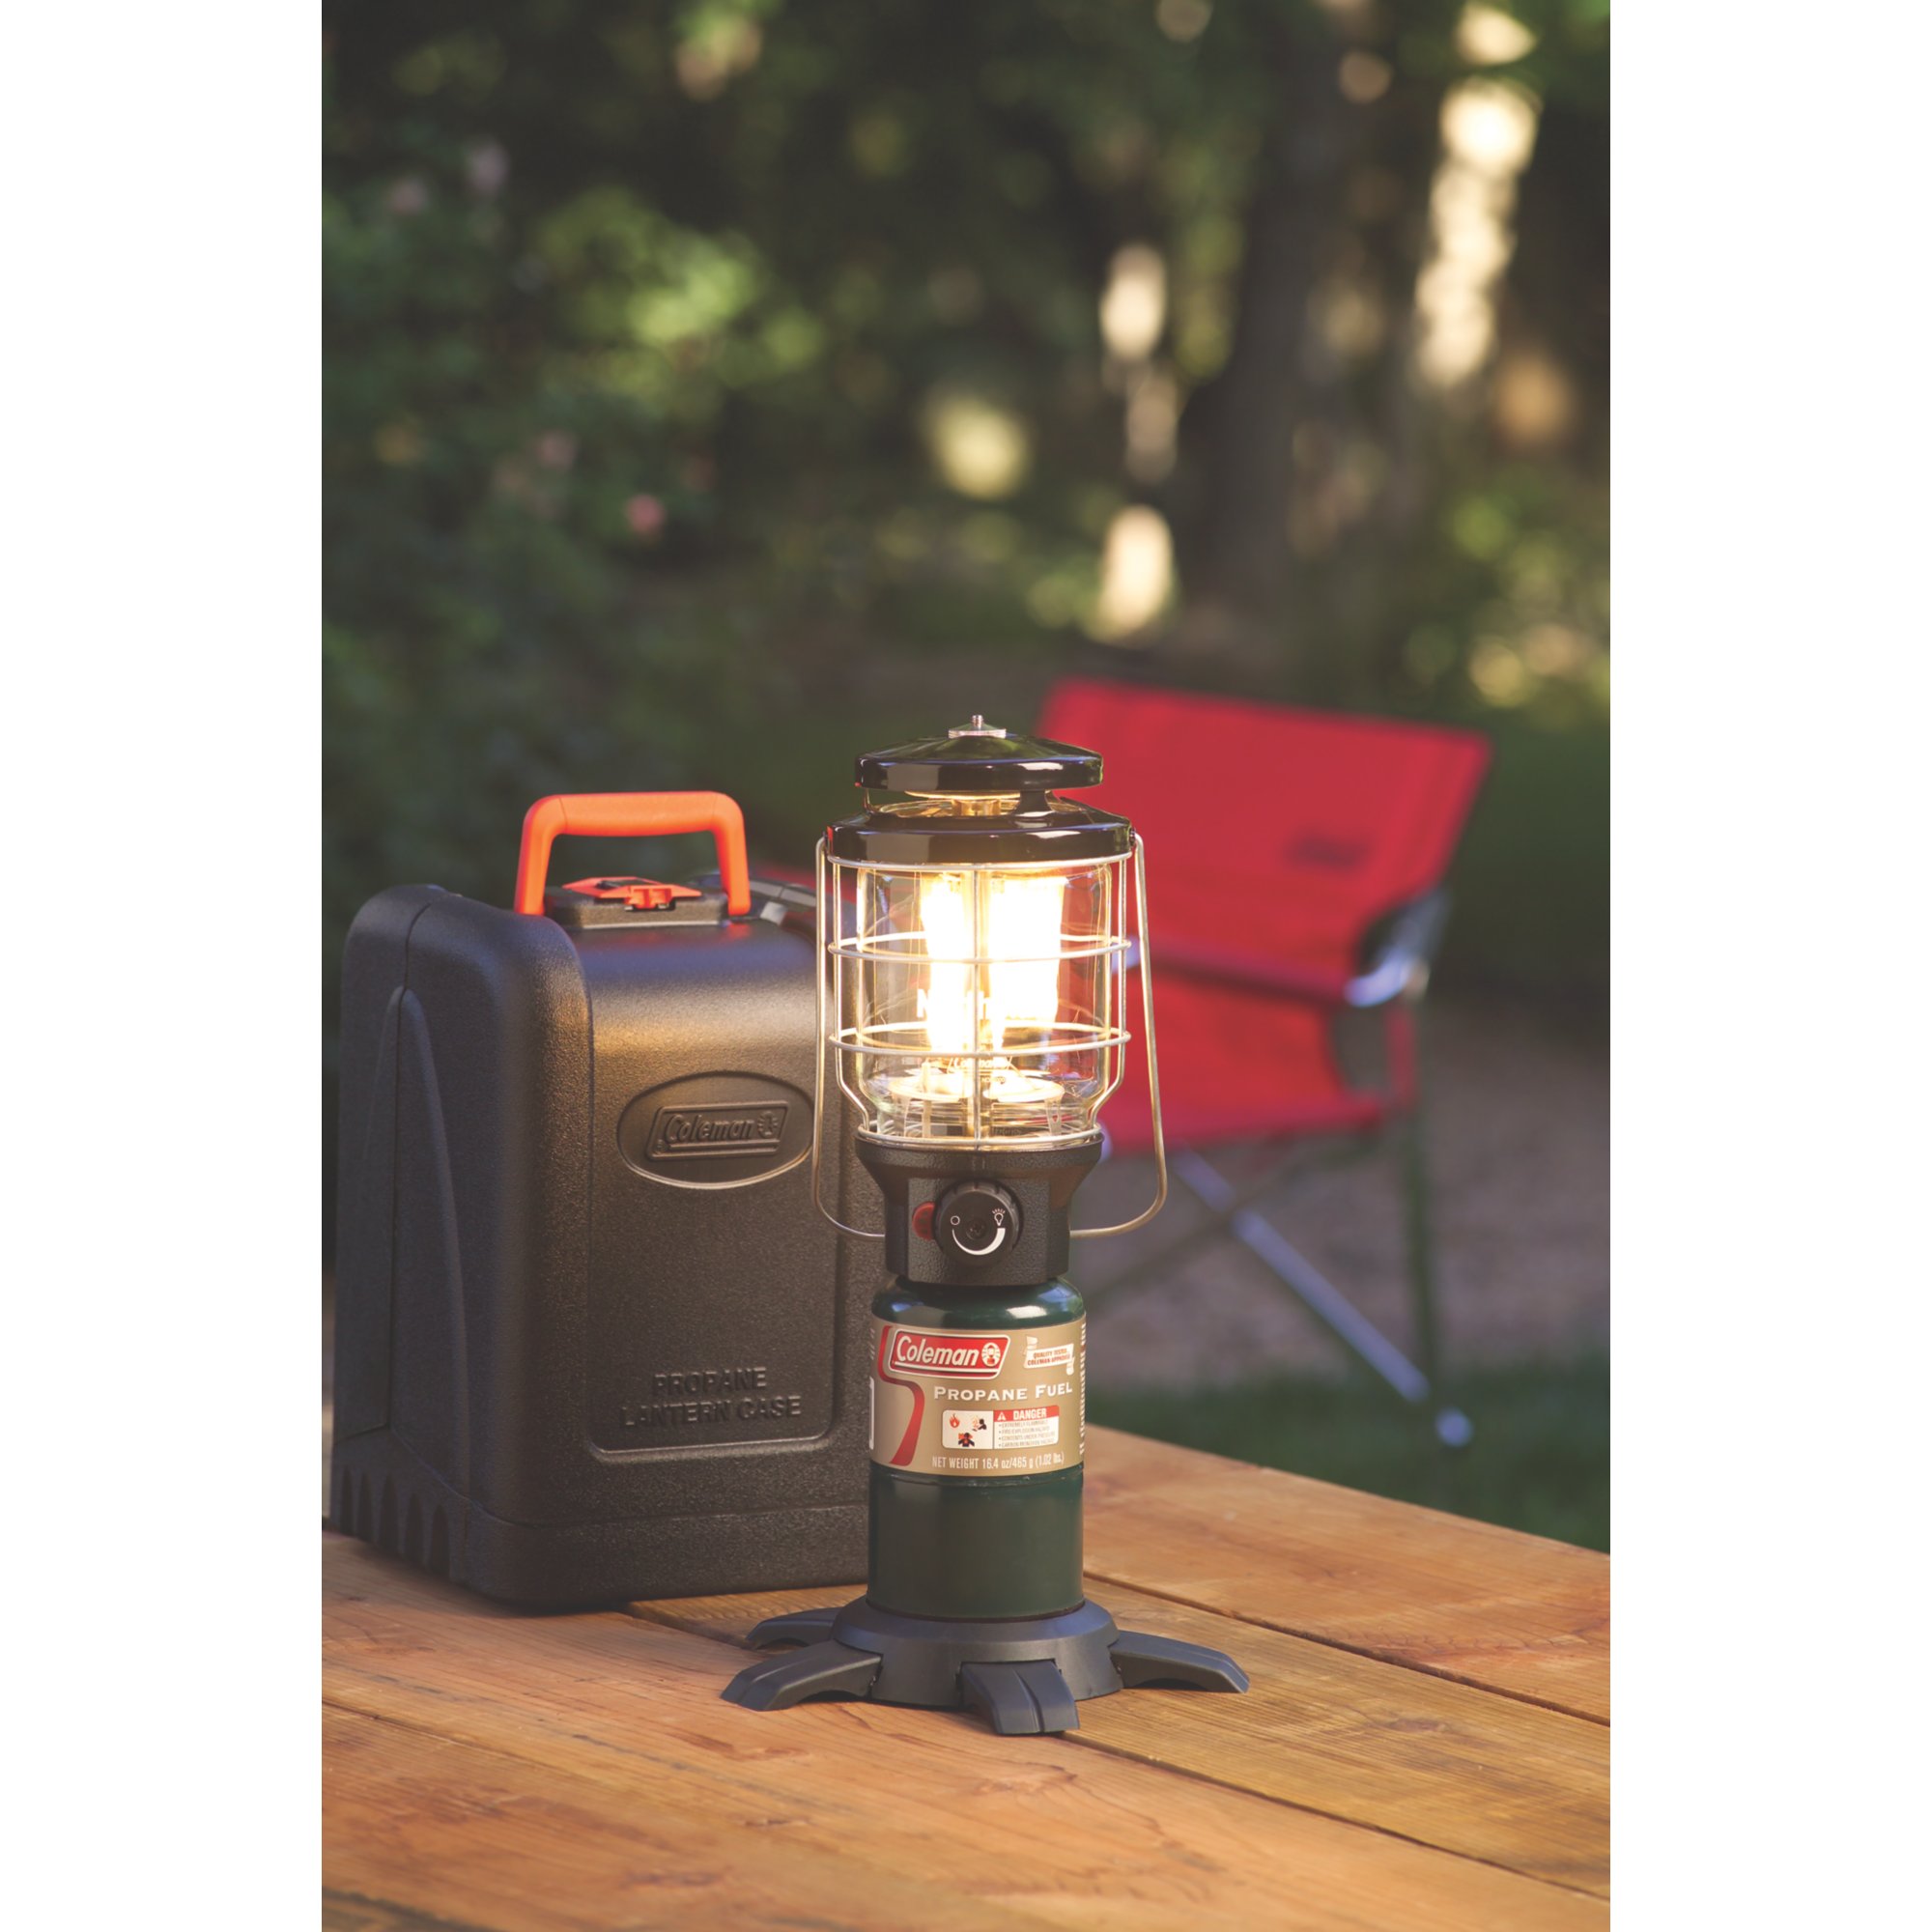 1500L NorthStar Propane Gas Lantern with Case Outdoor Camping Gear NEW